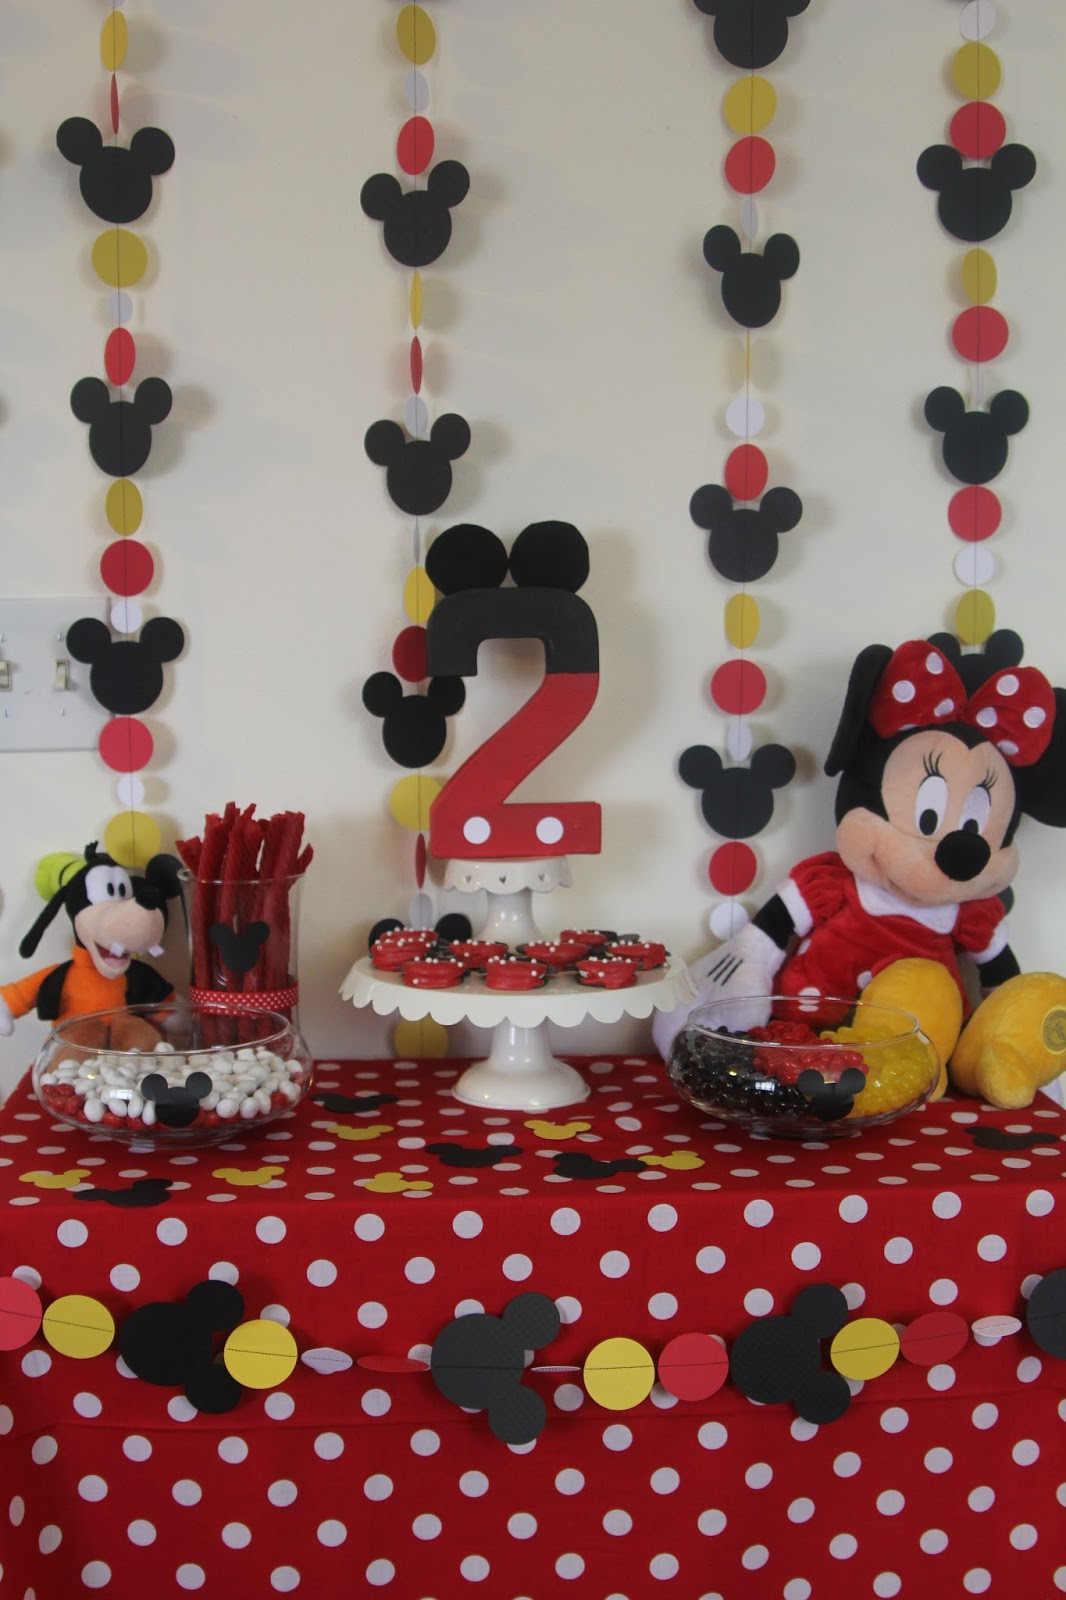 Red Minnie Mouse Birthday Decorations
 Decorating the Dorchester Way Simple Red Minnie Mouse